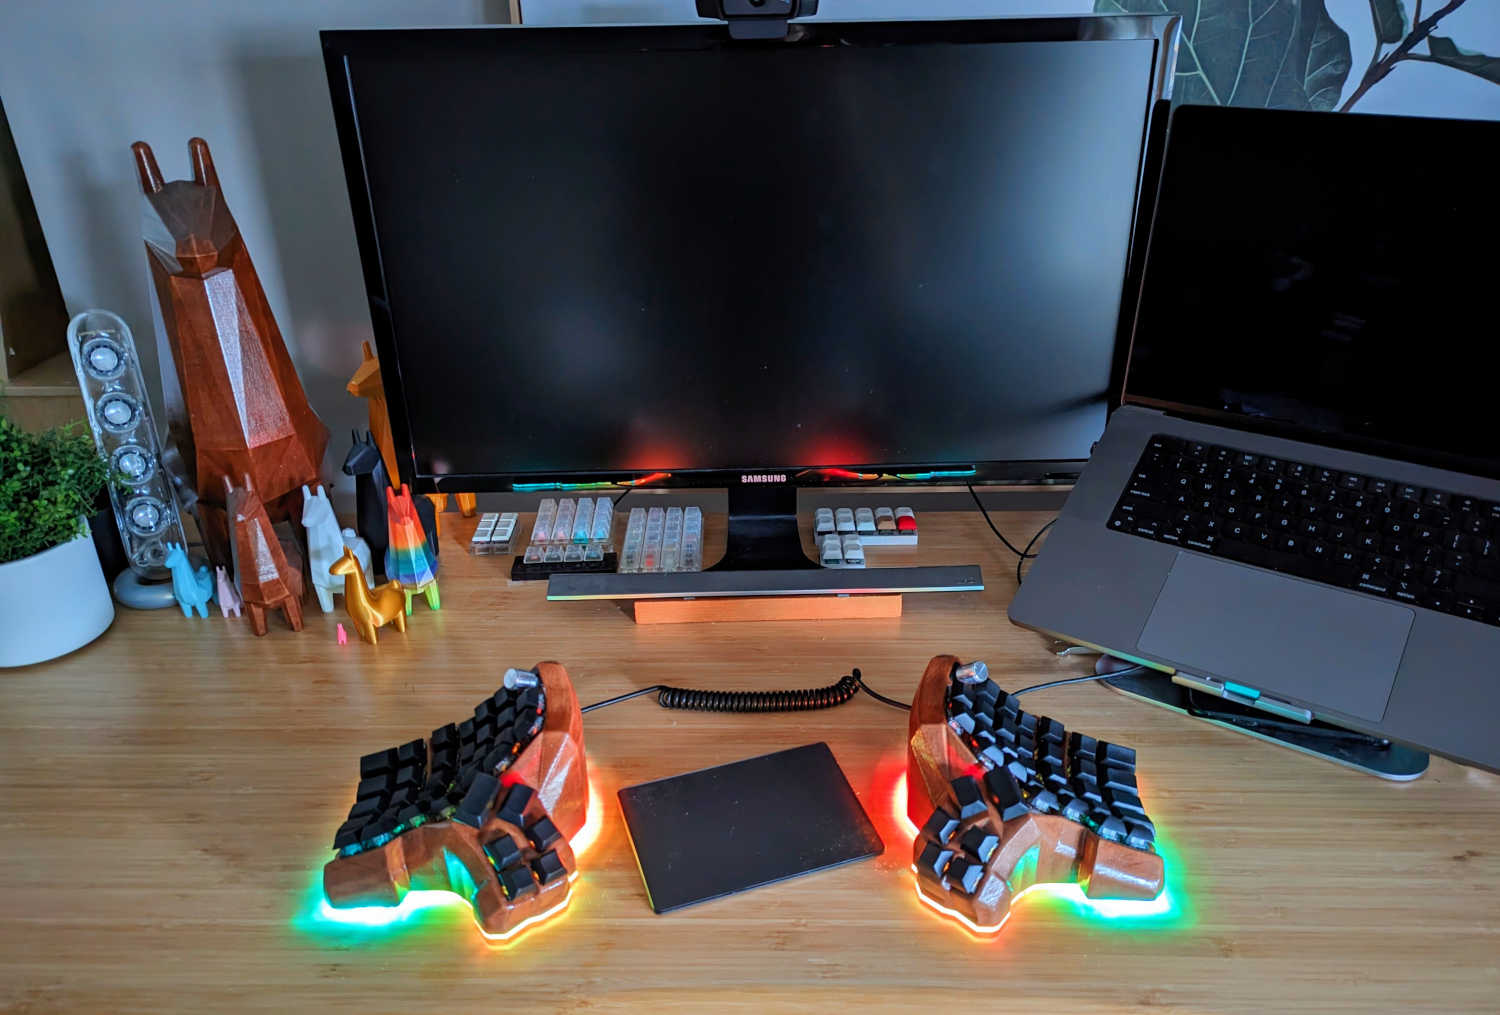 A picture of the finished keyboard on a desk